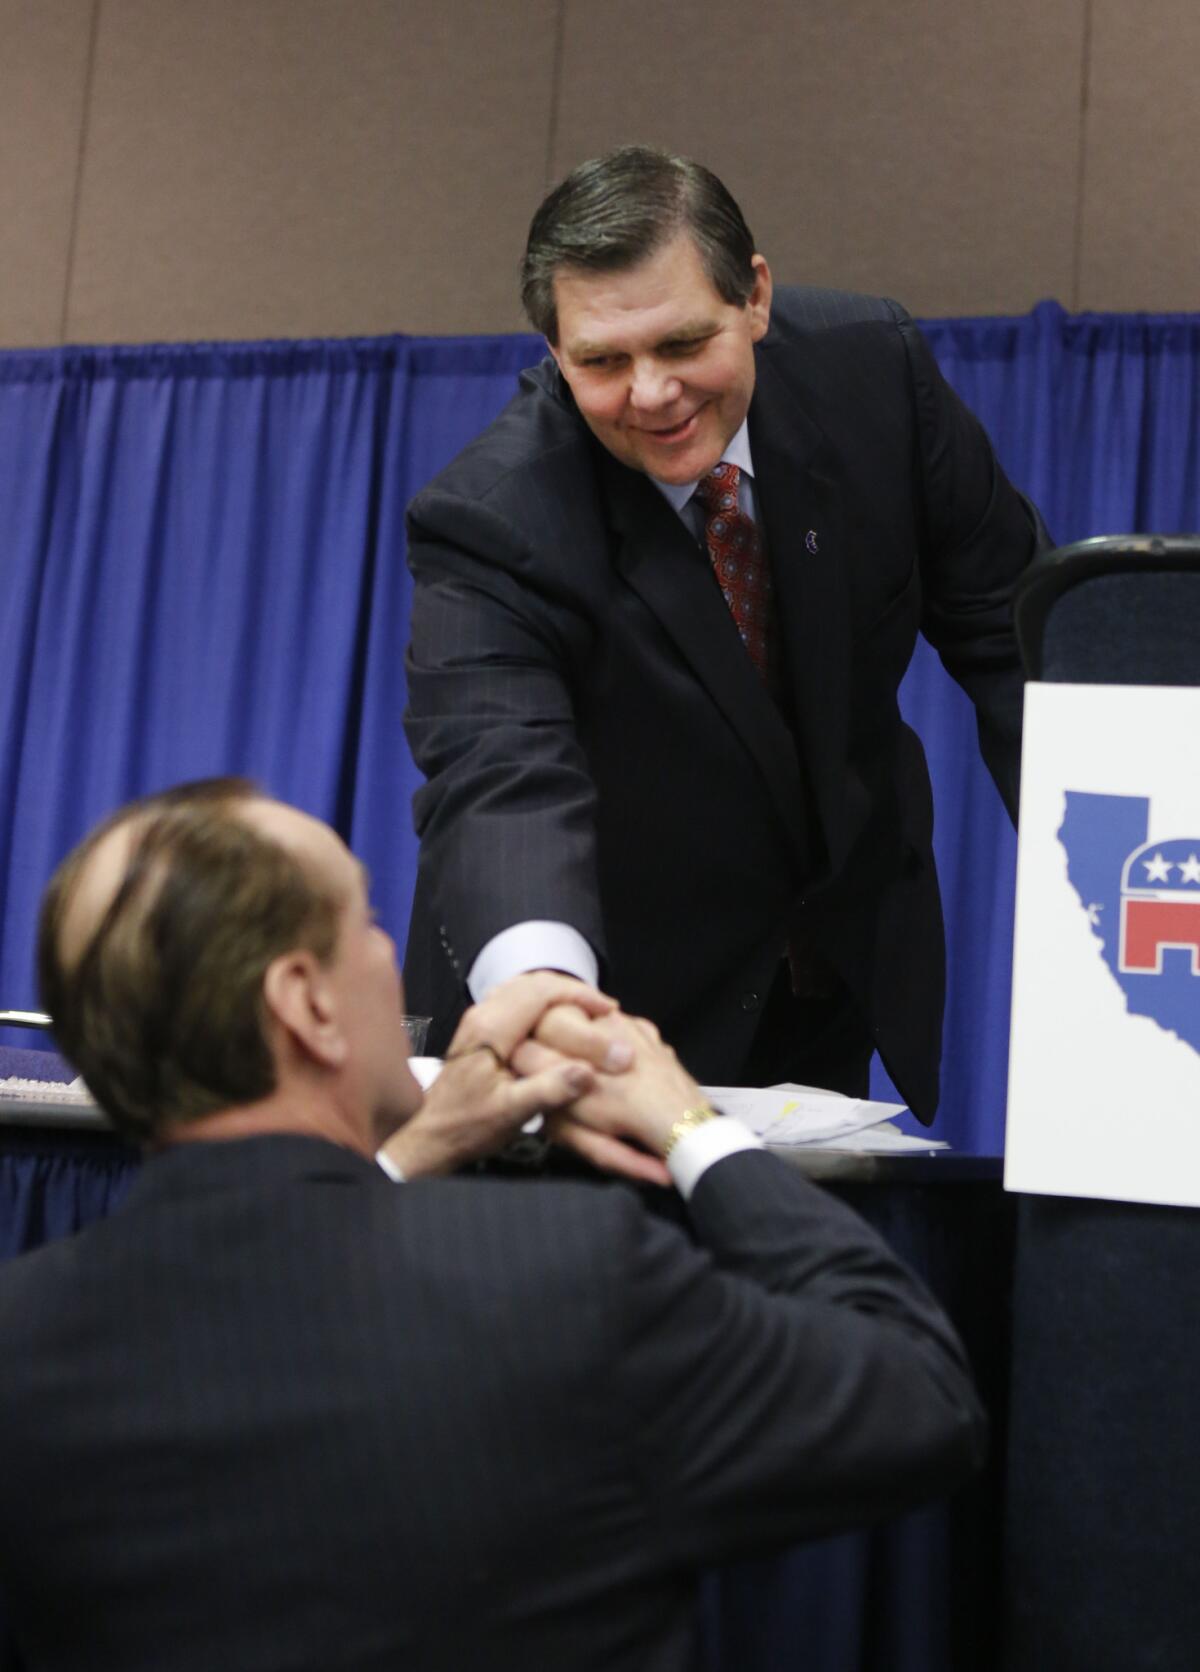 Former state Sen. Jim Brulte of Rancho Cucamonga, right, receives congratulations after his election as California Republican Party chairman during the CRP convention in Sacramento in 2013.